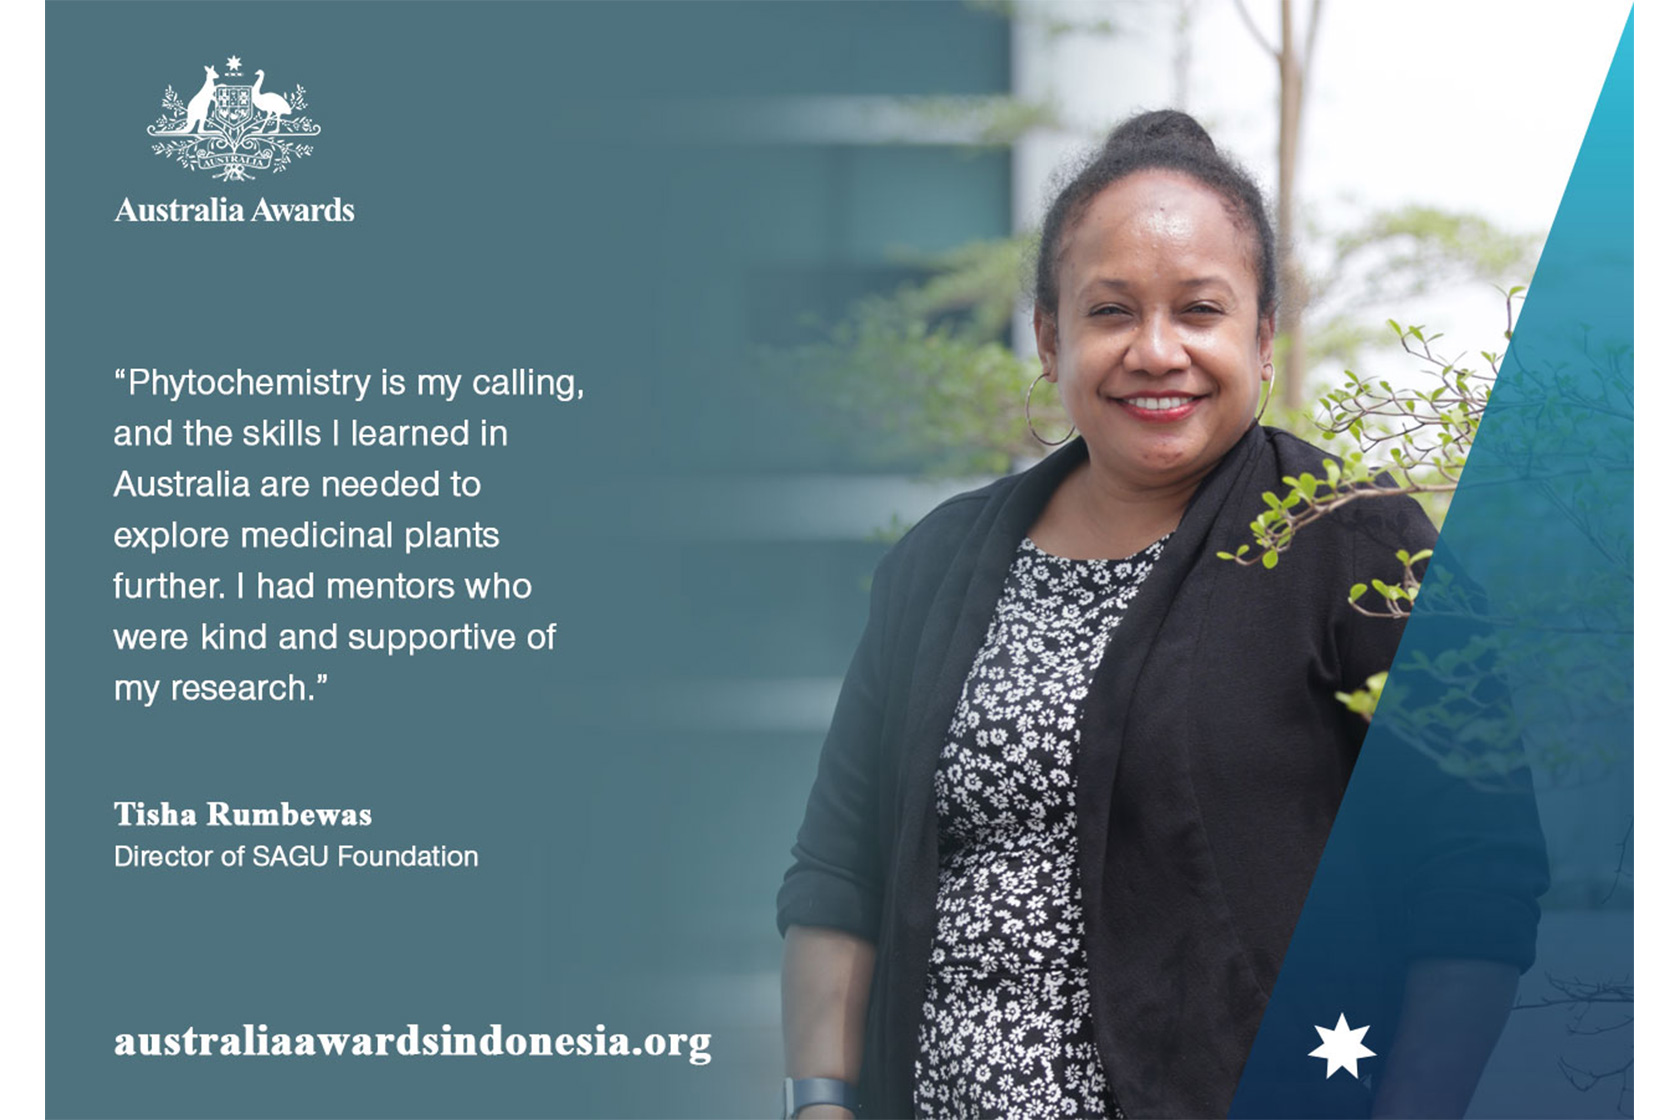 A testimonial from Tisha Rumbewas about her experience studying and living in Australia